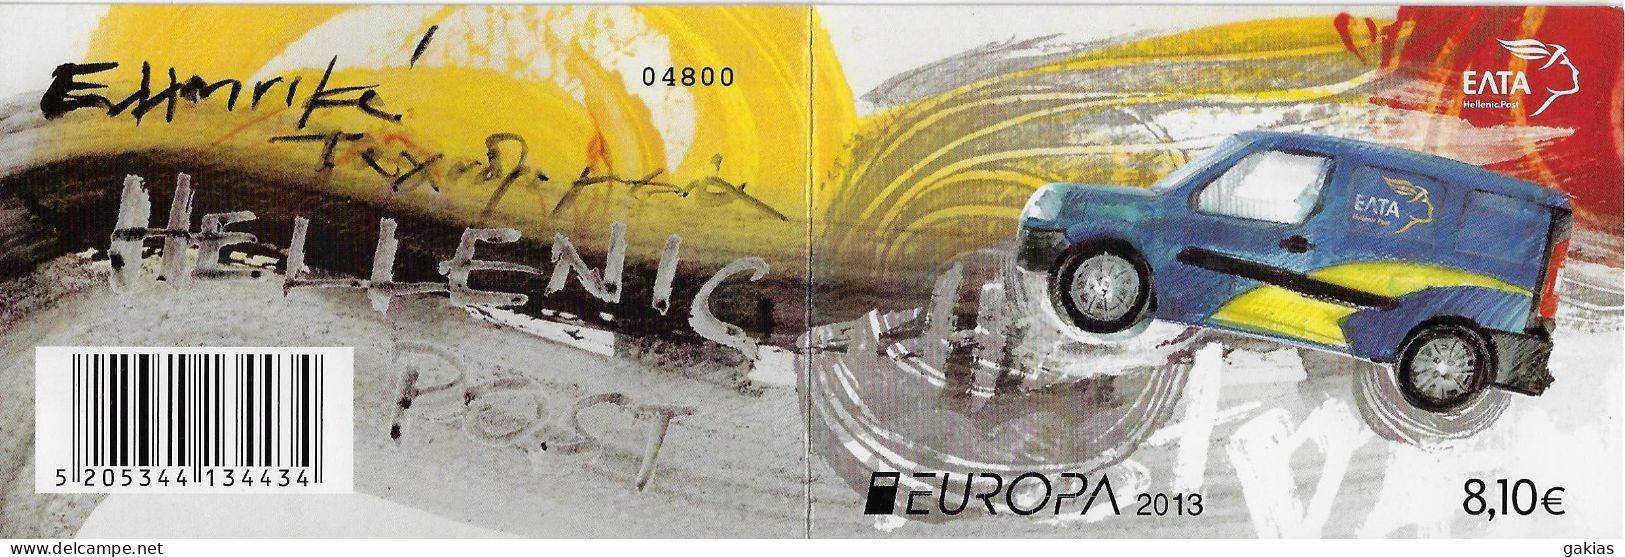 GREECE 2013 "EUROPA-CEPT", 2 Sets In Booklet, 2 Side Perforation, MNH/**. - Unused Stamps